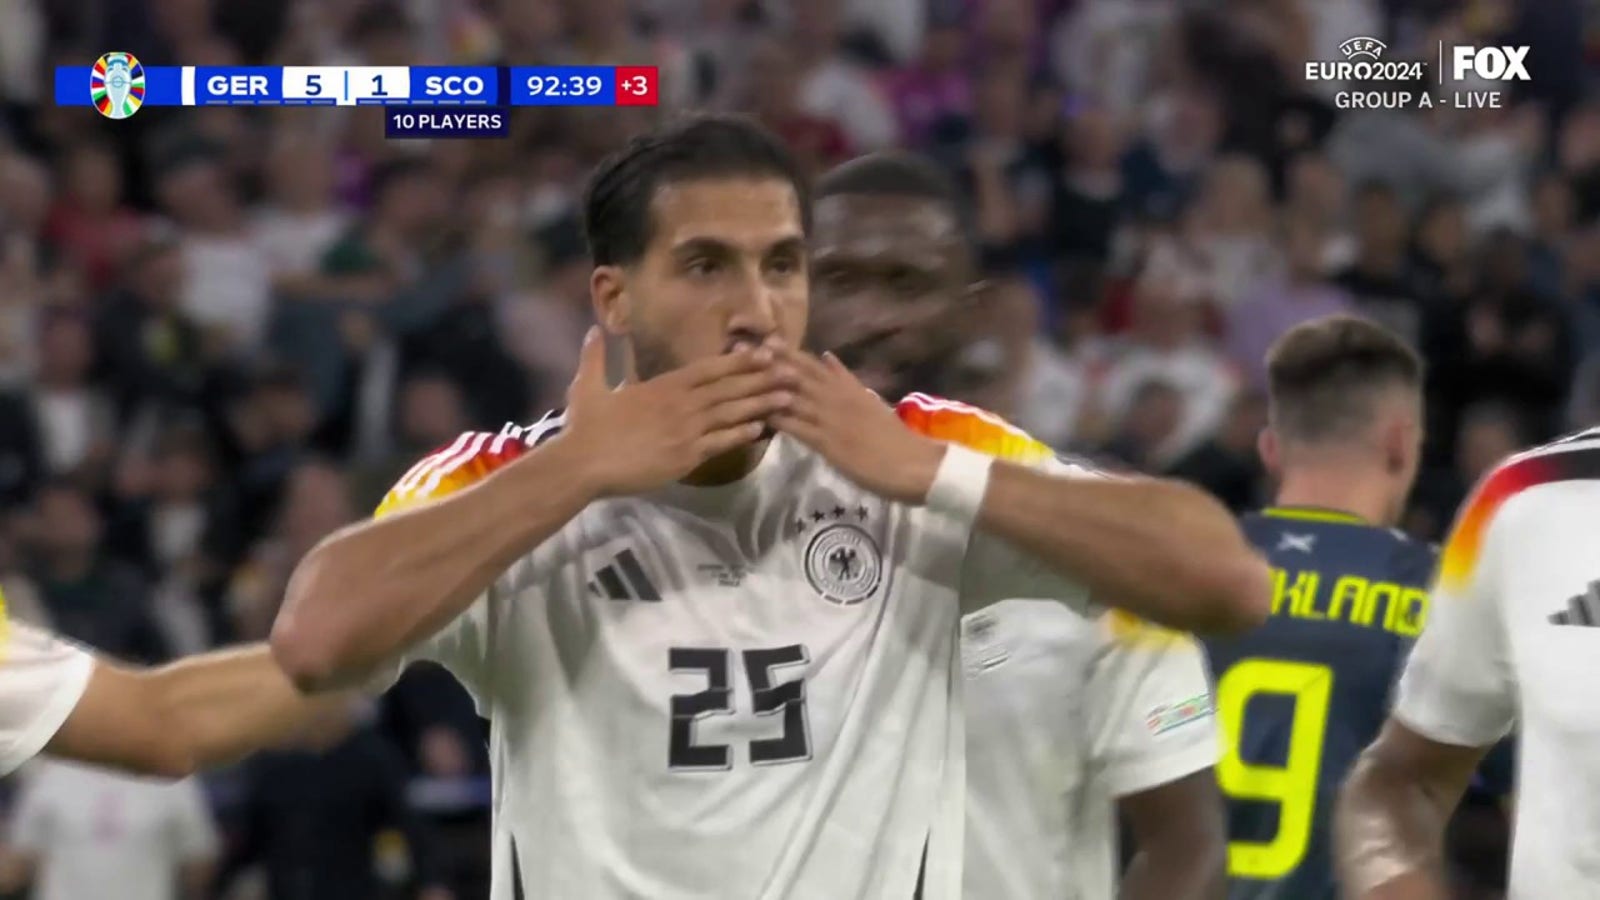 Emre Can scores a beautiful goal in 90+2' to give Germany a 5-1 win over Scotland | UEFA Euro 2024